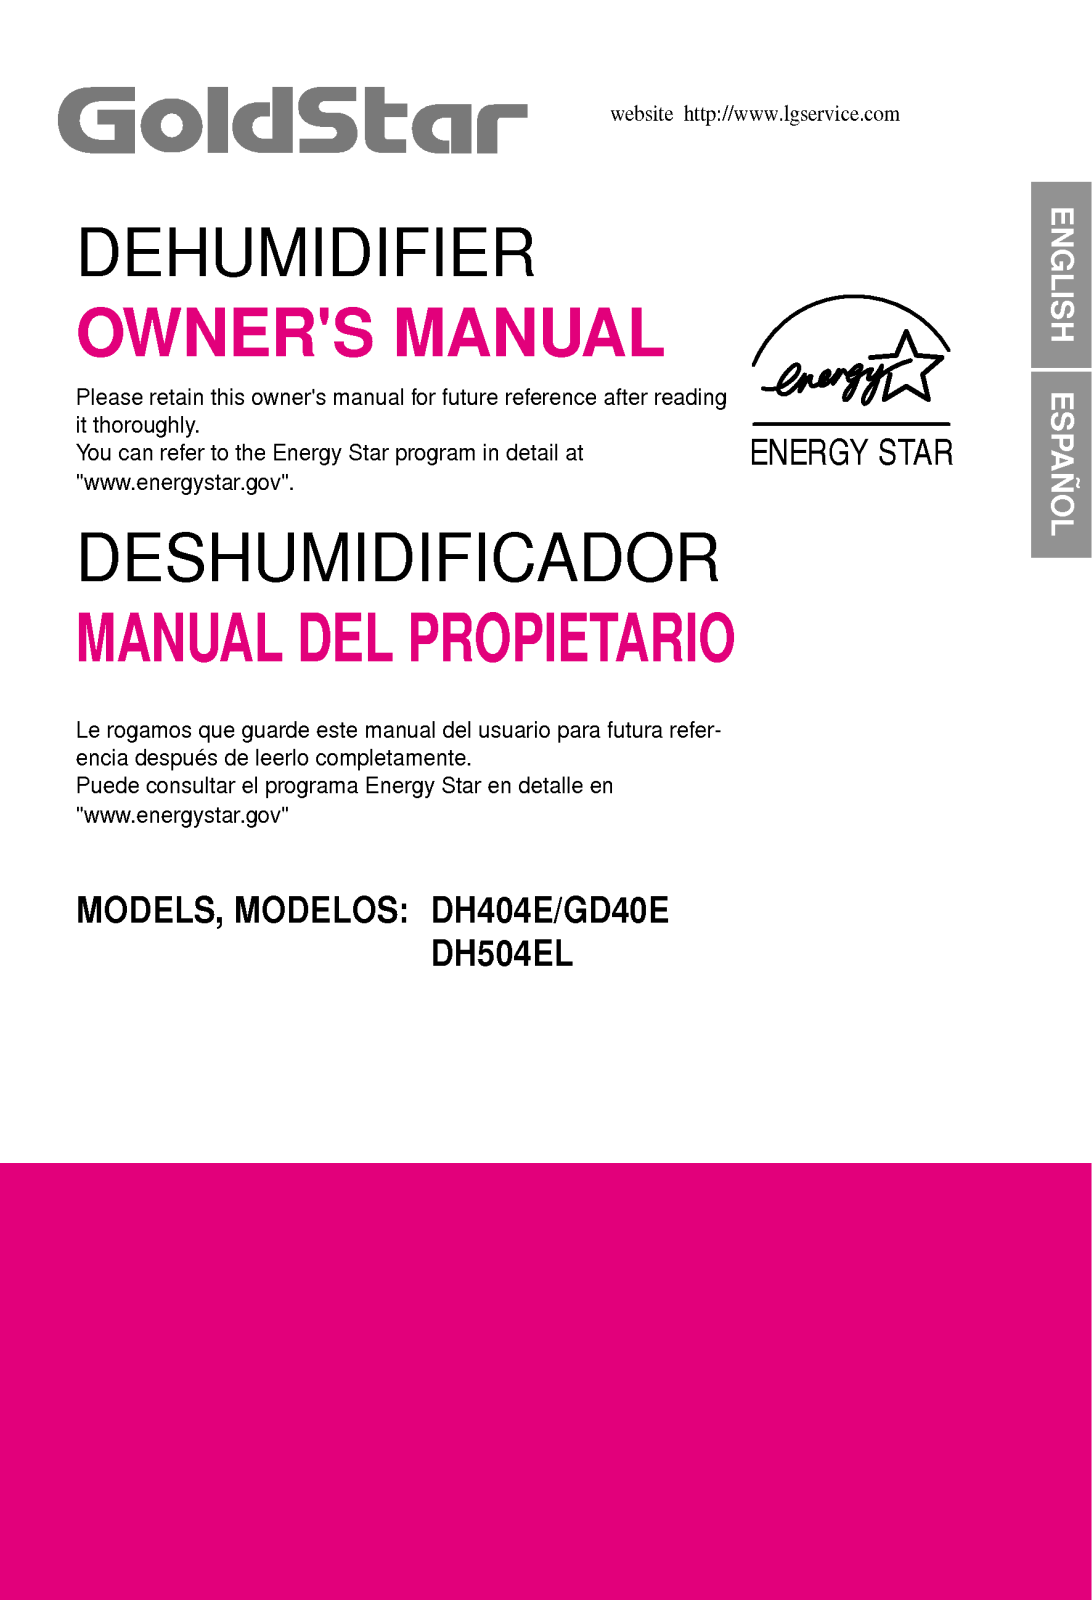 LG DH504ELY5, DH504ELY6, LD-40EY5 User Manual